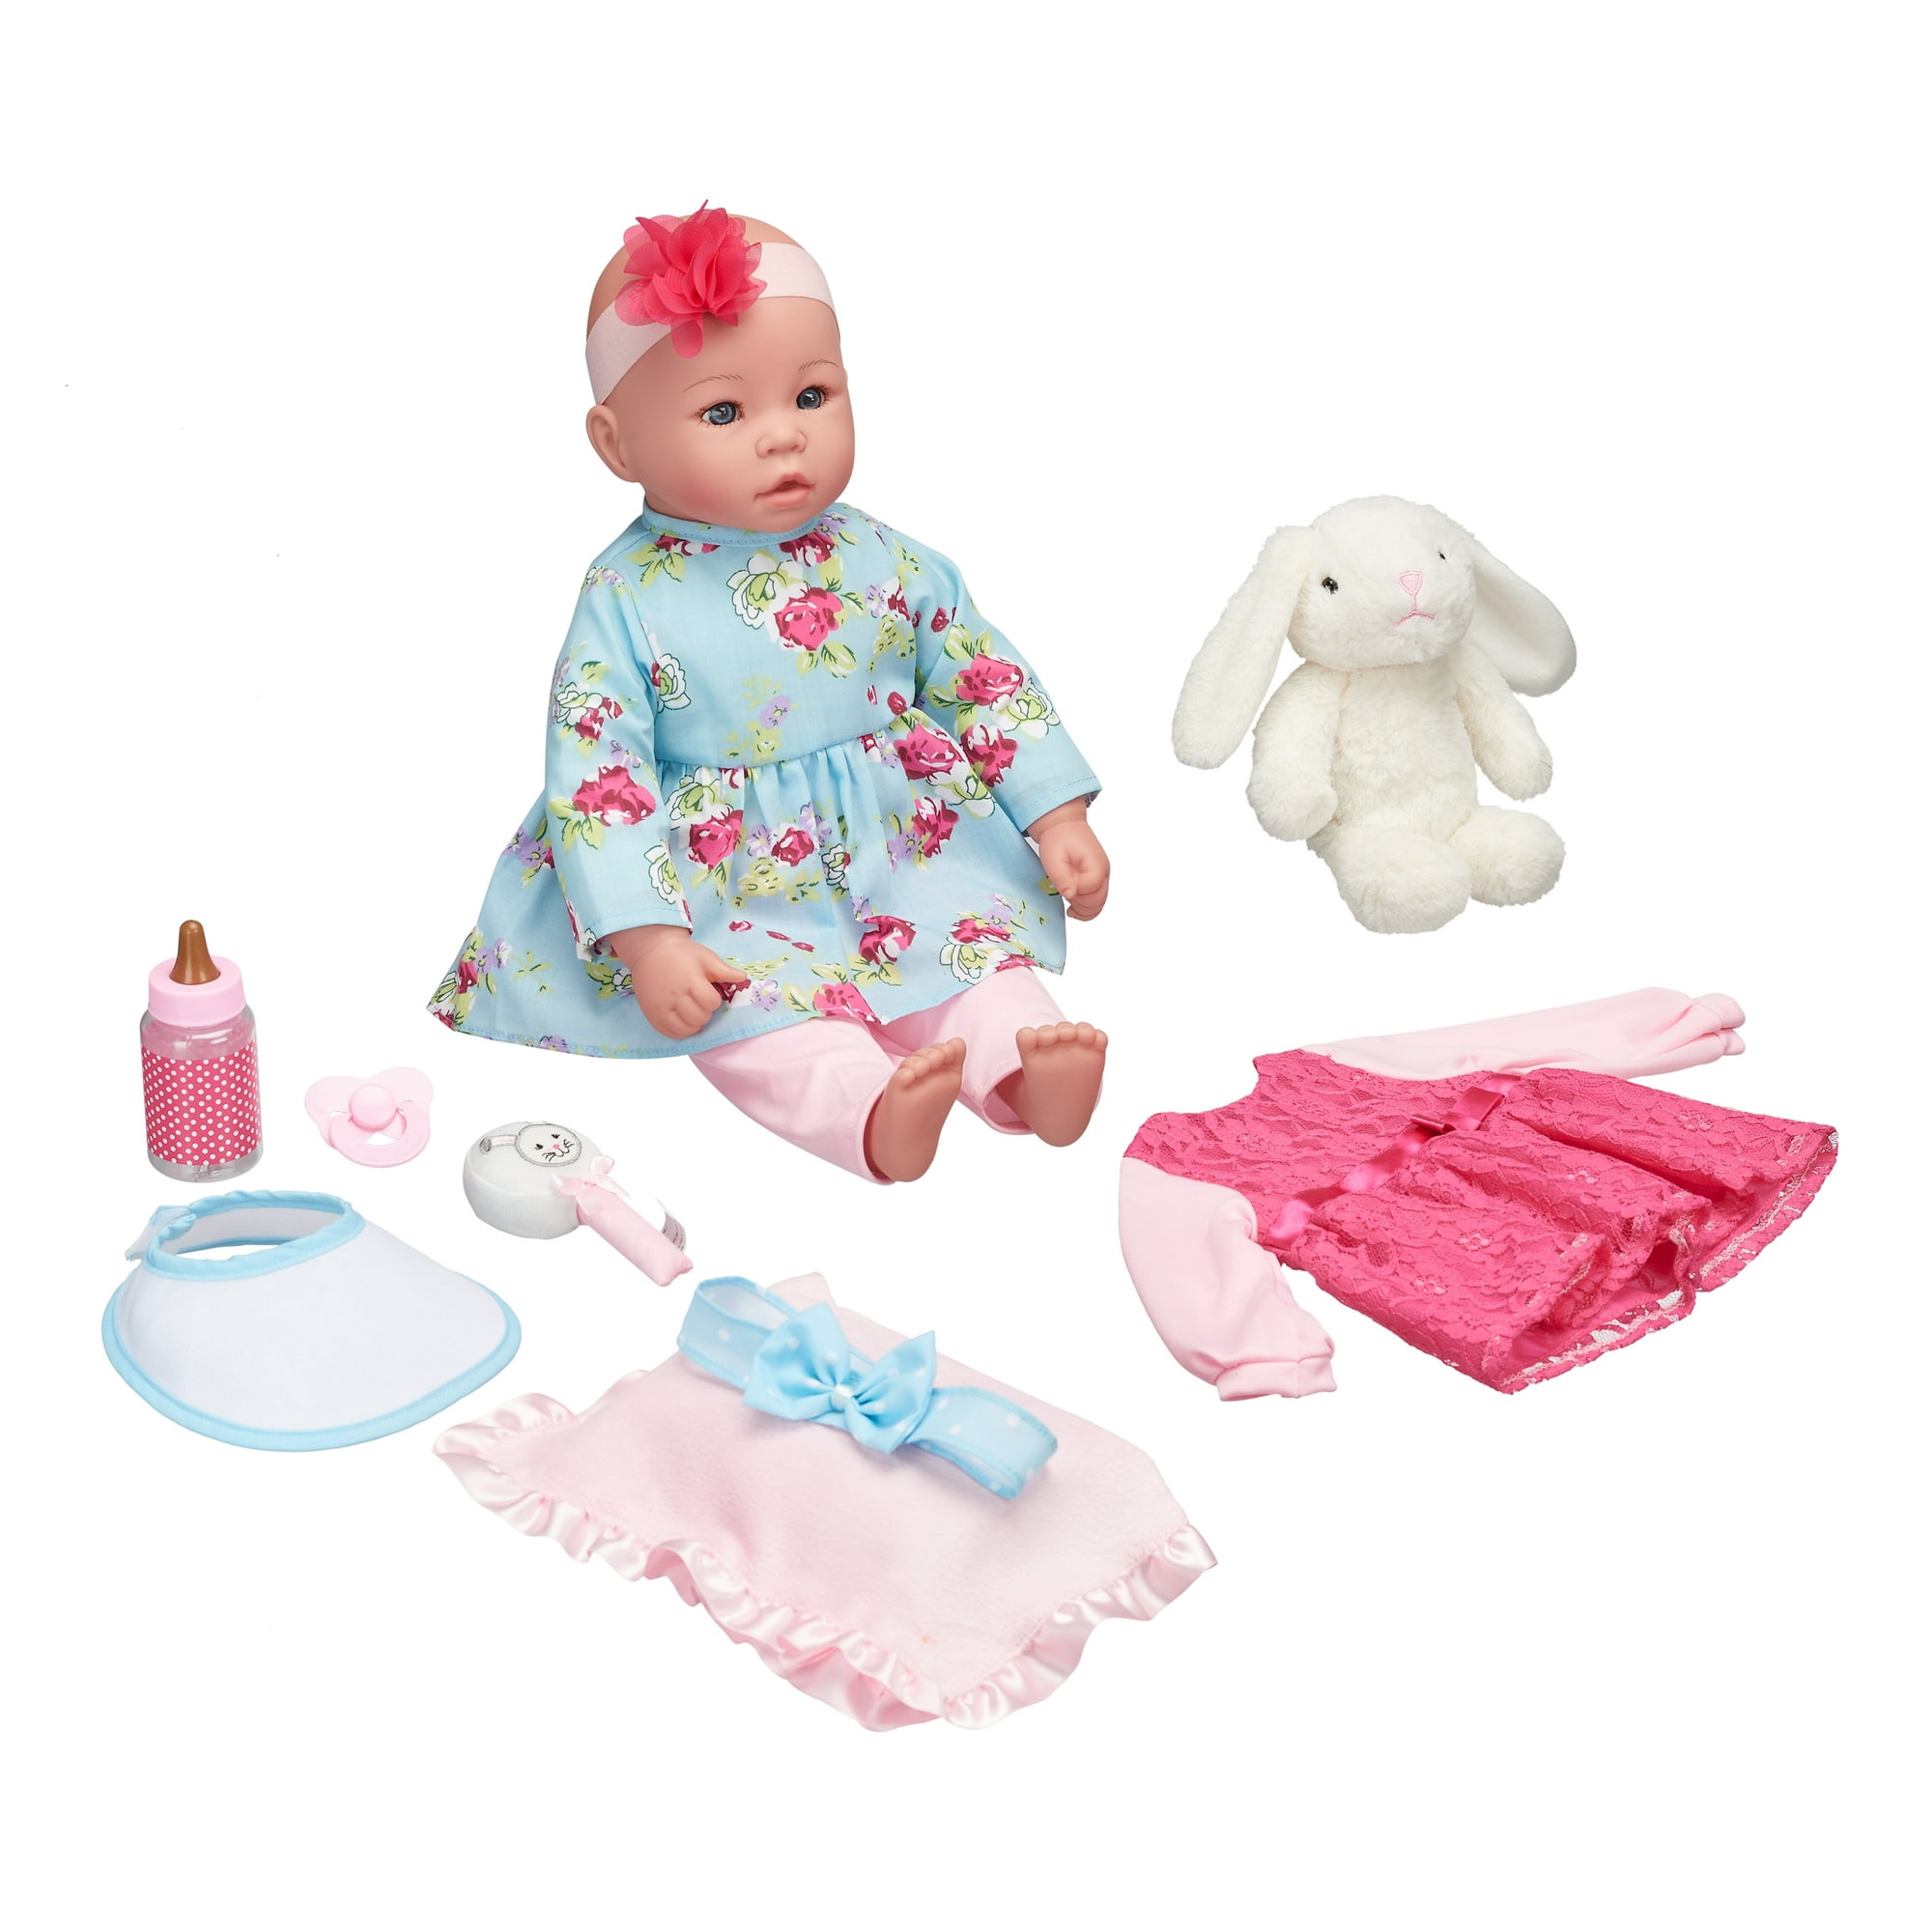 pulver eventyr gnier My Sweet Love 18" Doll and Accessories Set with Plush Bunny - Walmart.com